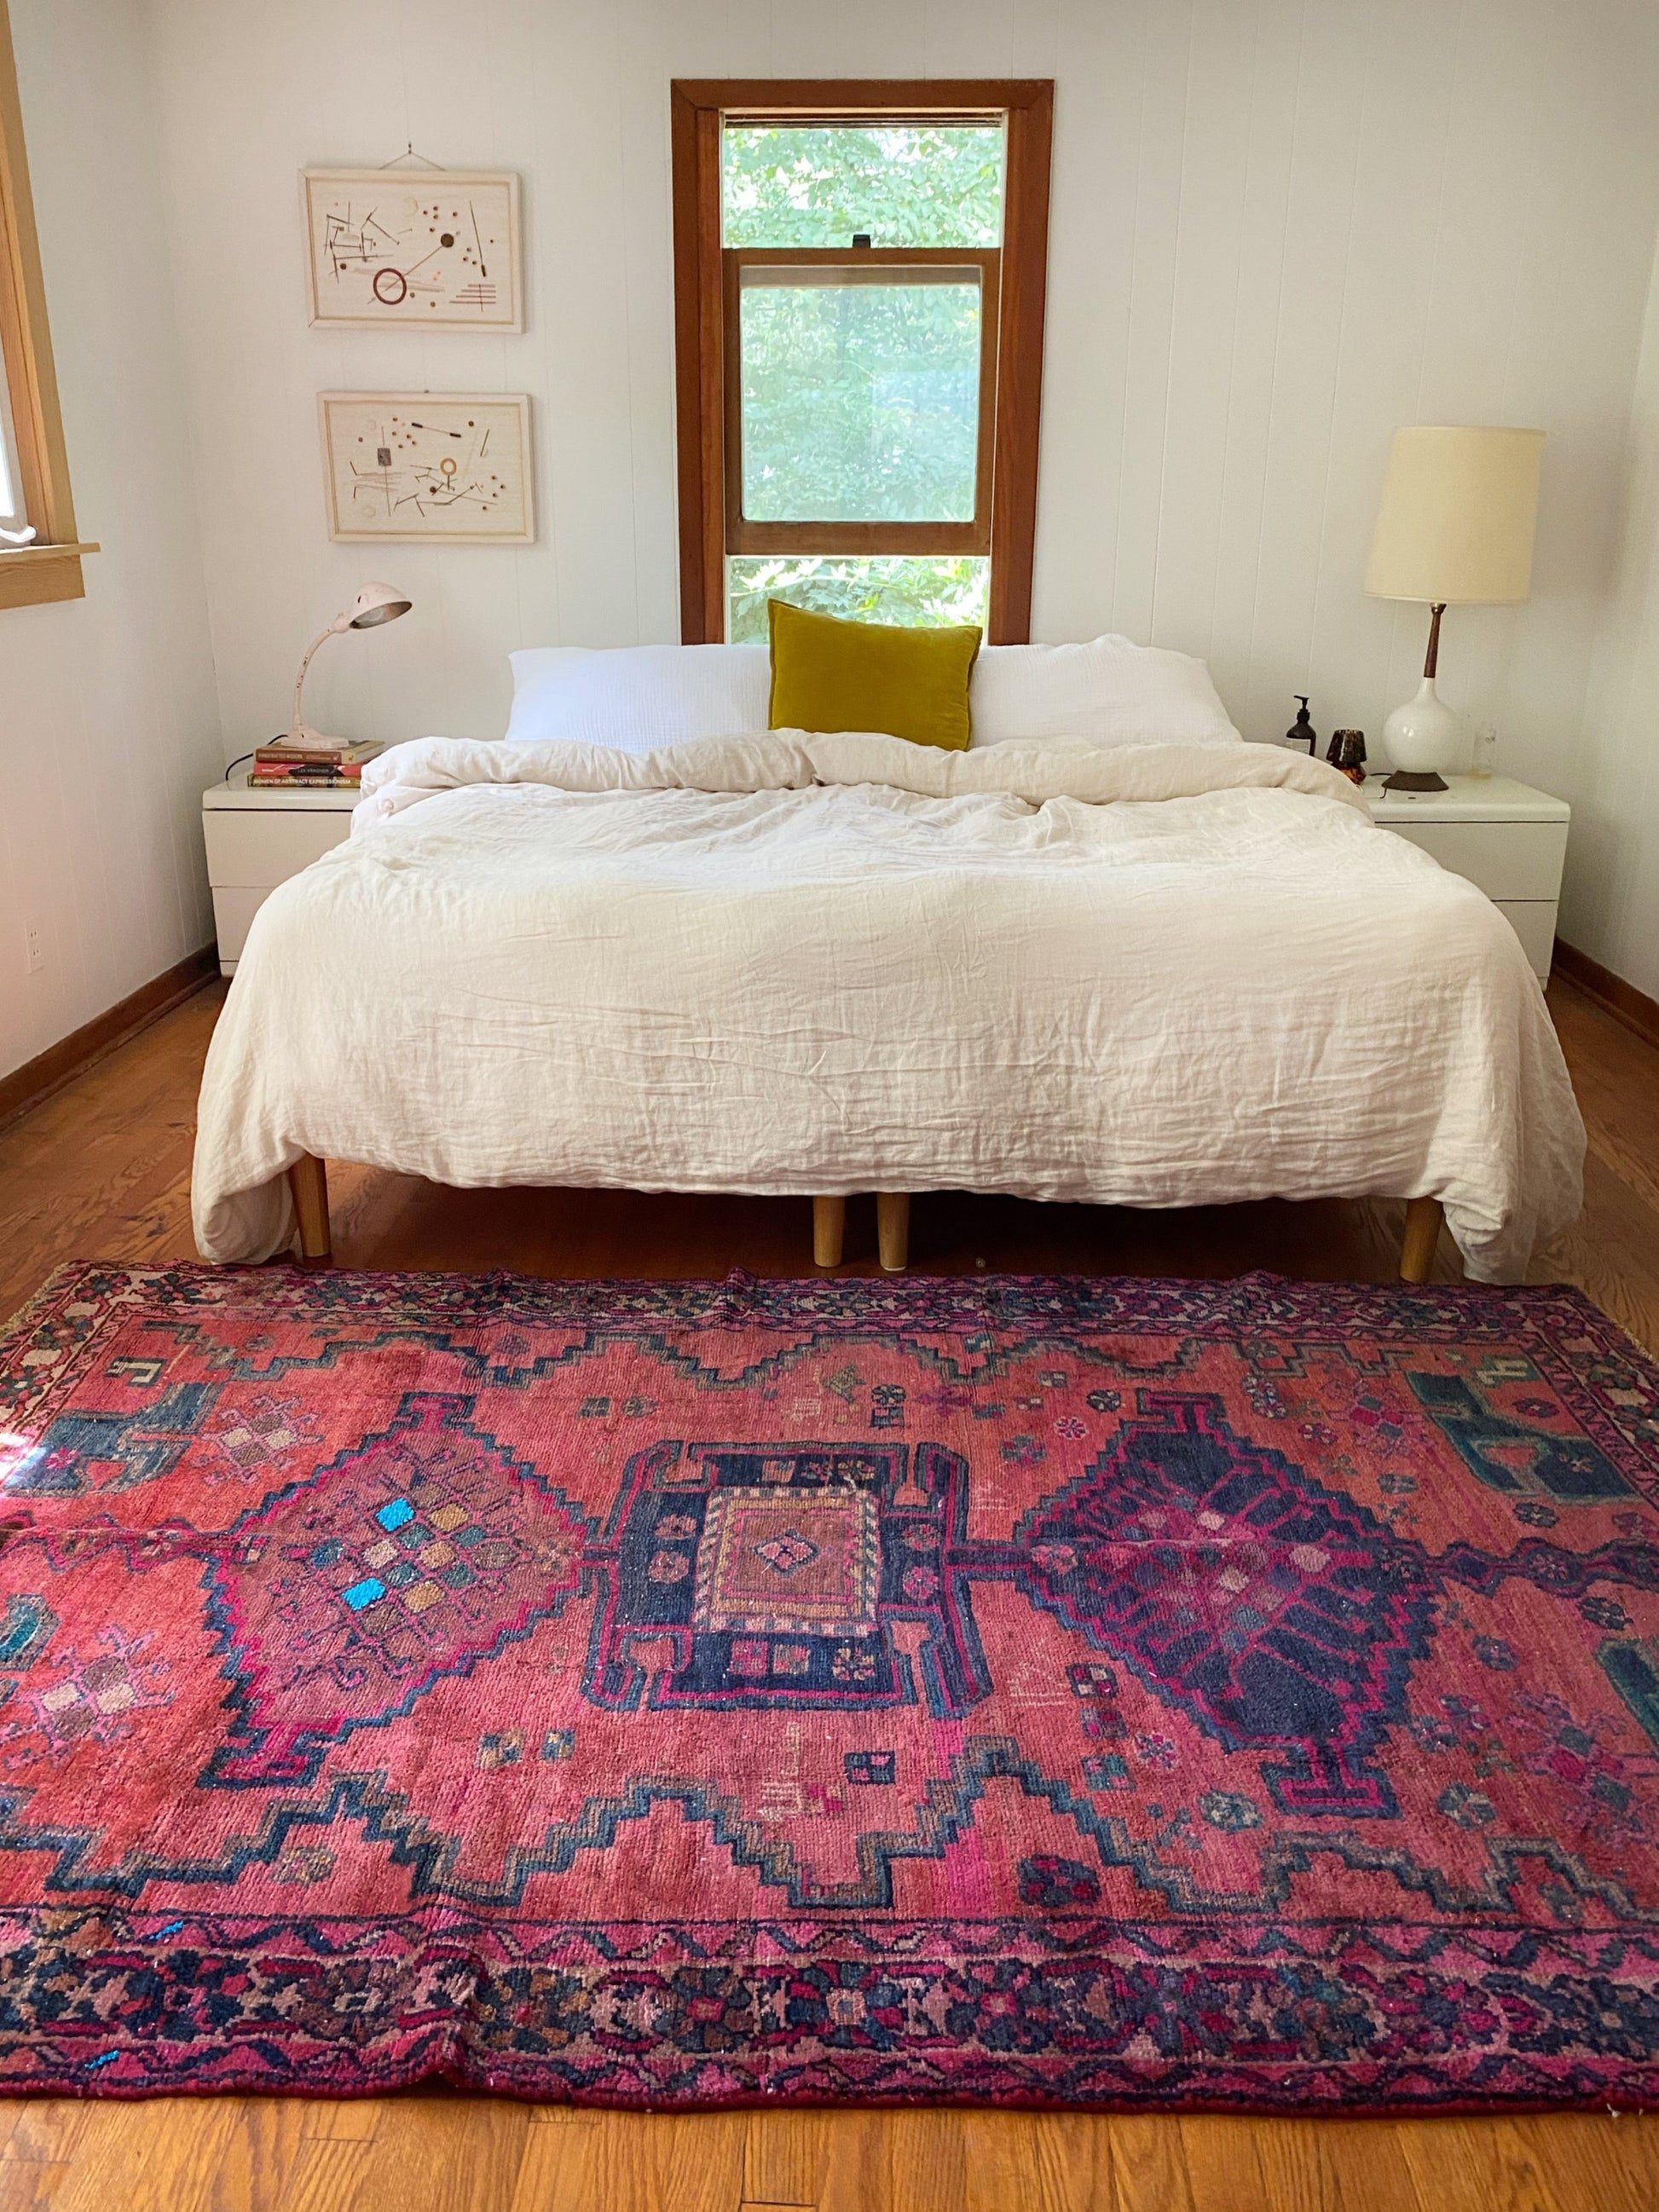 Oak Persian Rug at the foot of a bed makes the room a special space